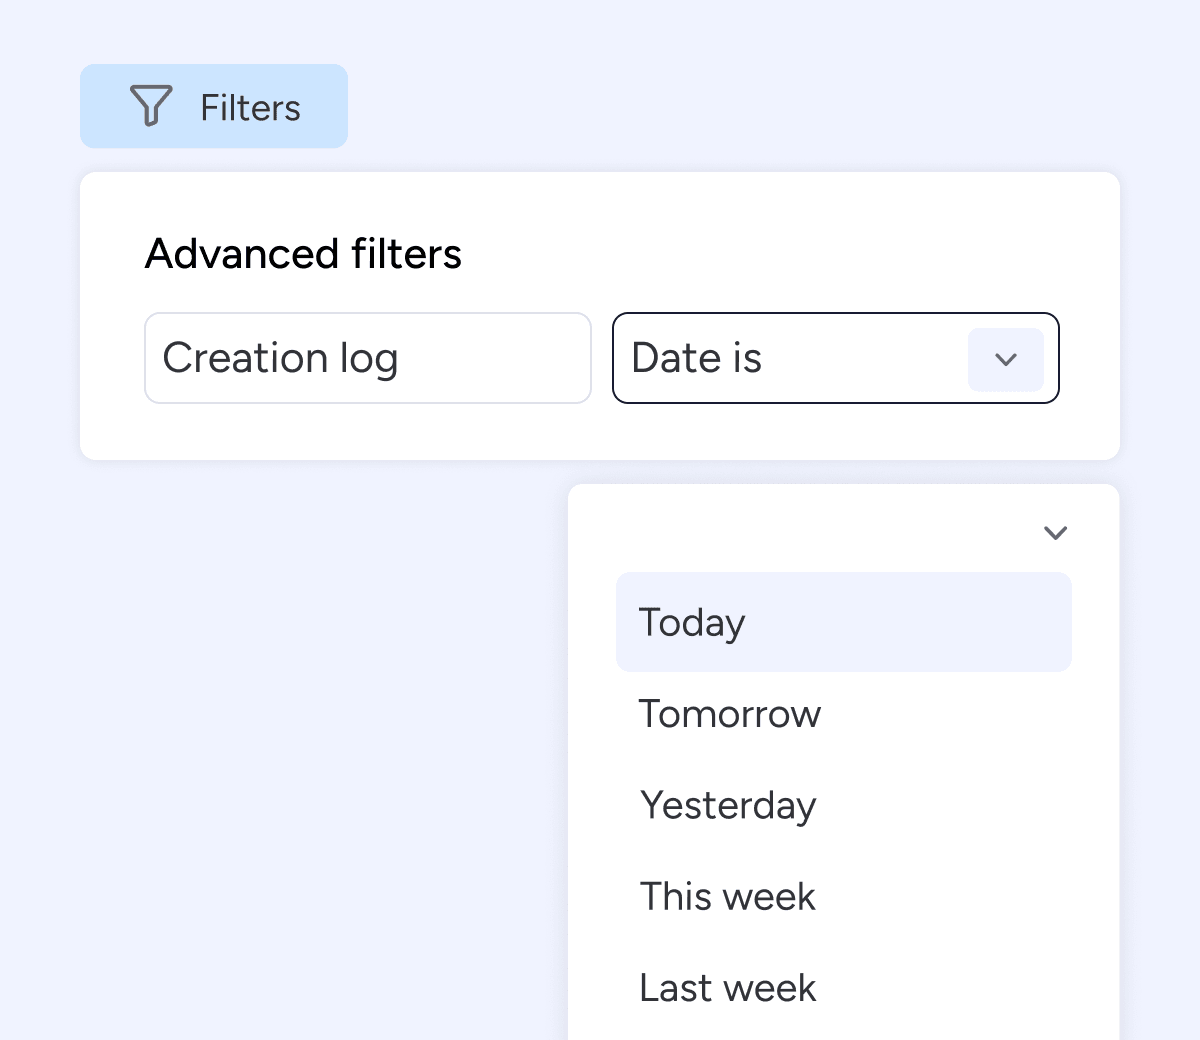 Ability to filter by the date of creation log and last update columns